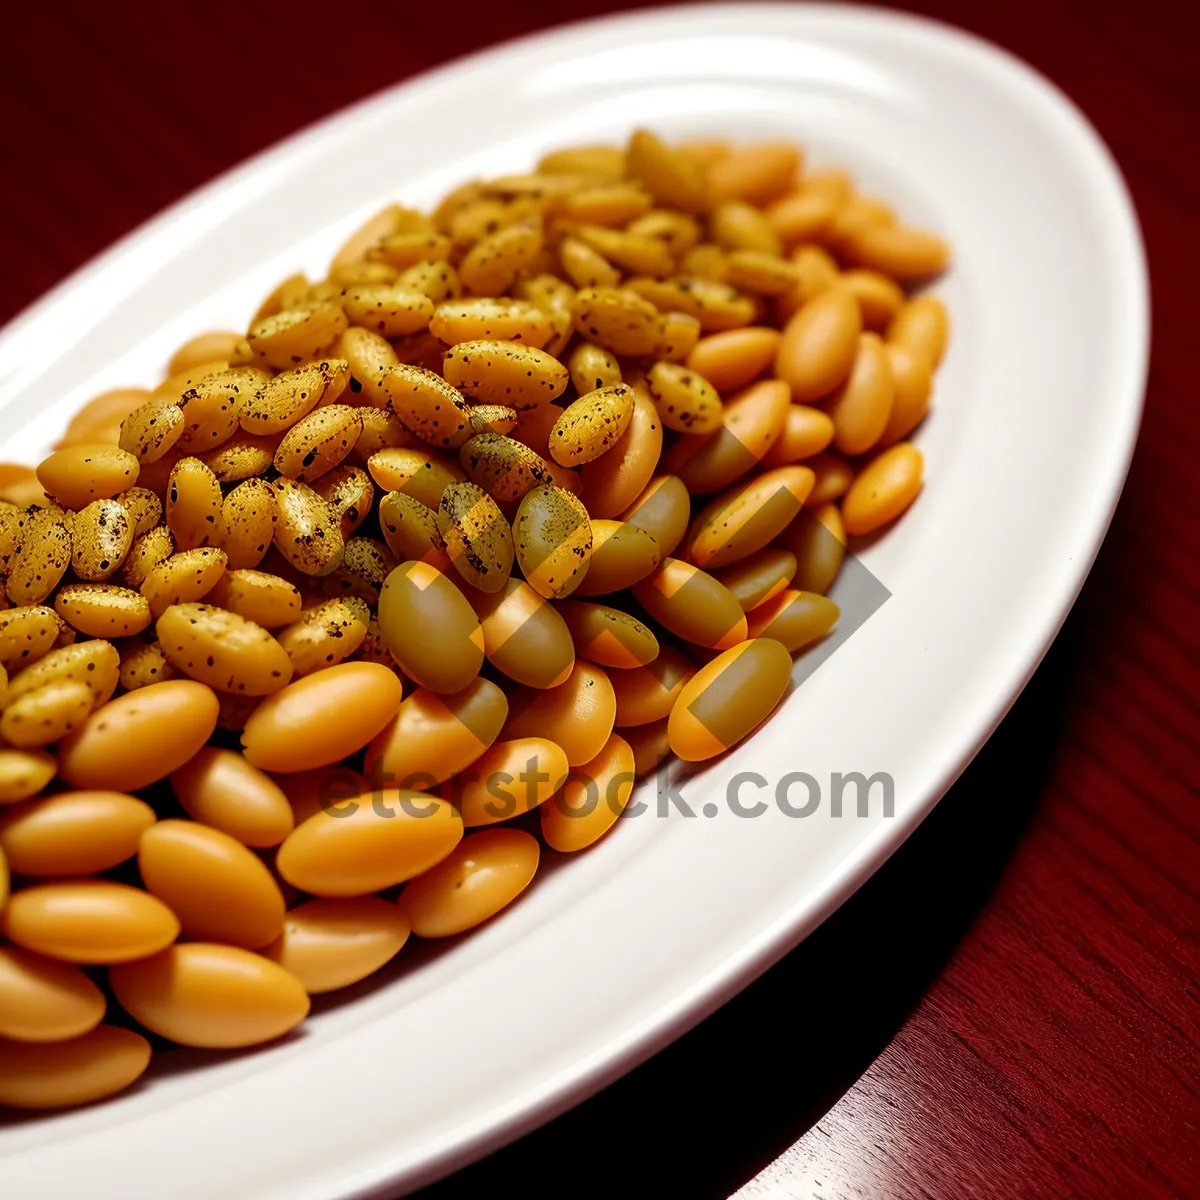 Picture of Nutritious assortment of organic lentils, peanuts, and beans